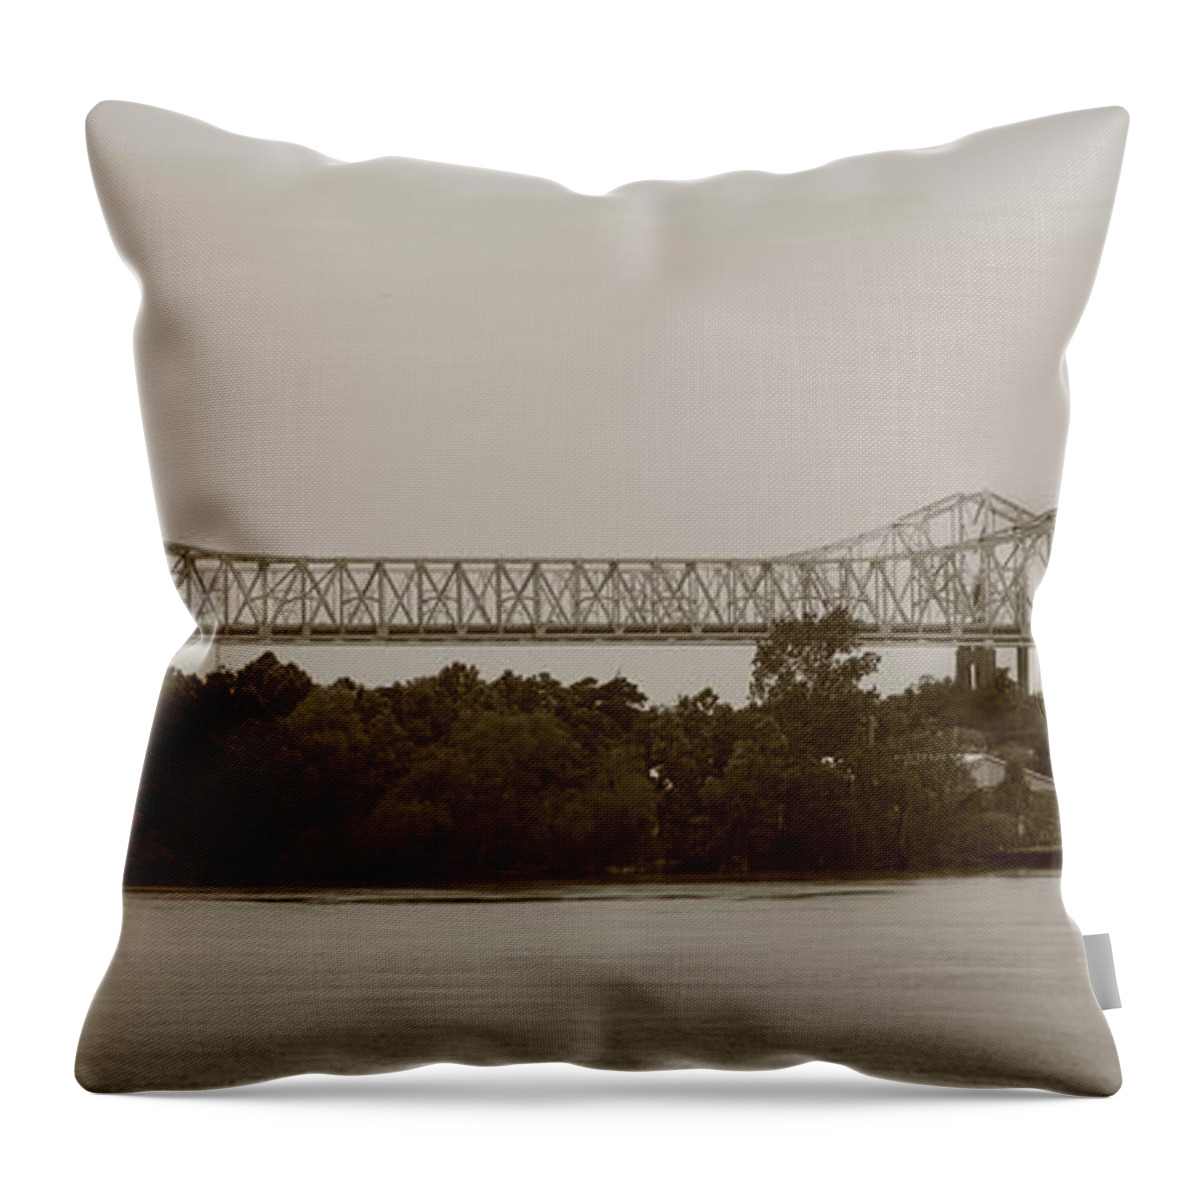 New Orleans Throw Pillow featuring the photograph Crescent City Connection by Andre Turner